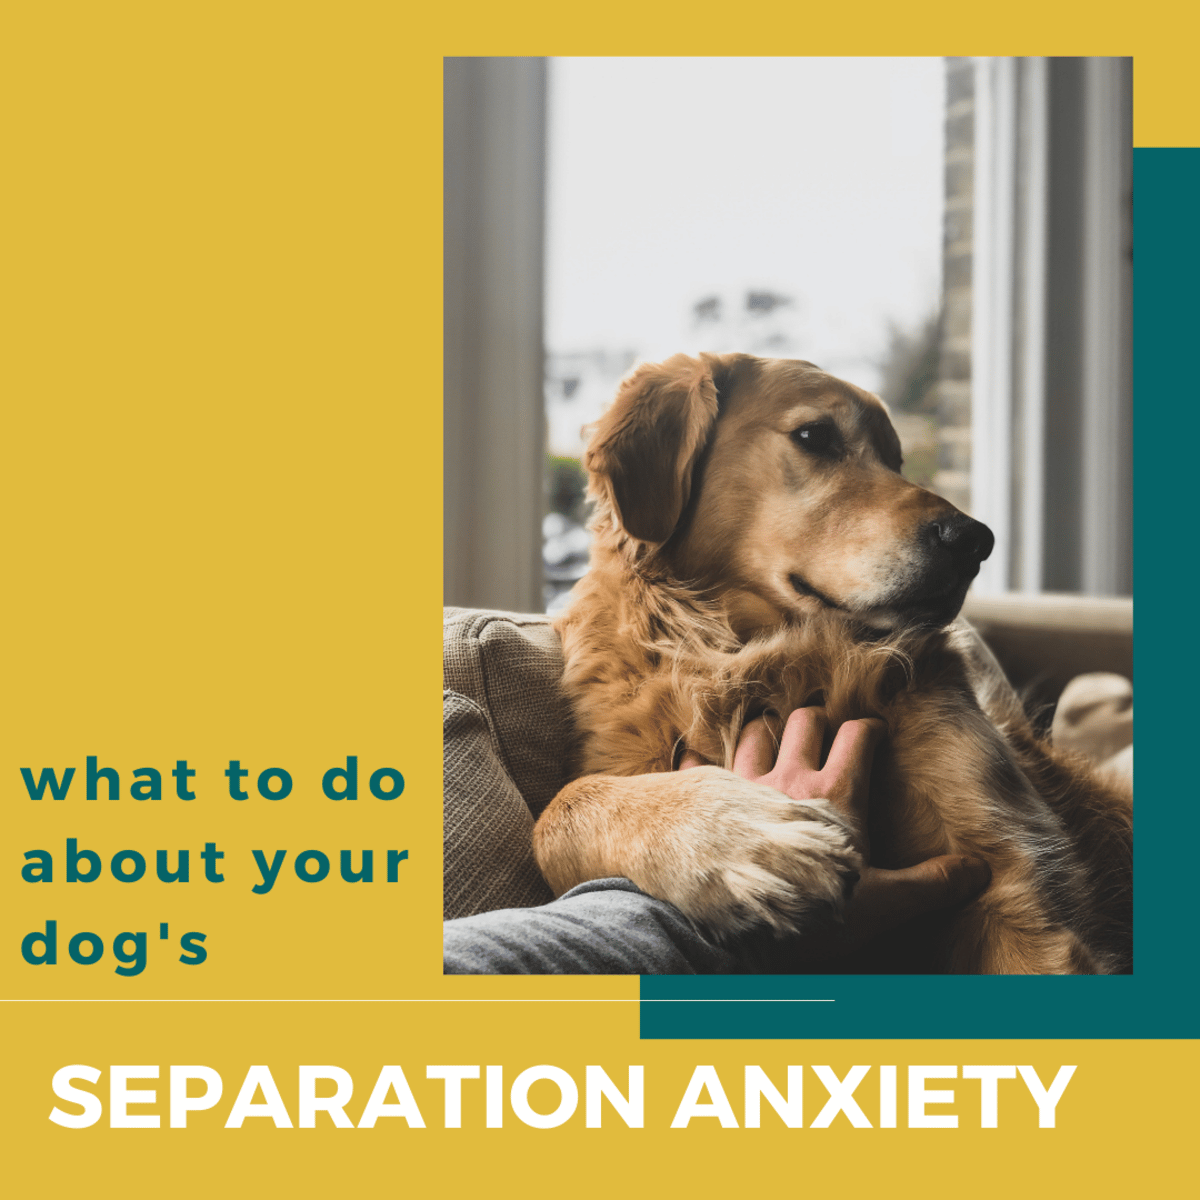 What to do About Your Dogâs Separation Anxiety